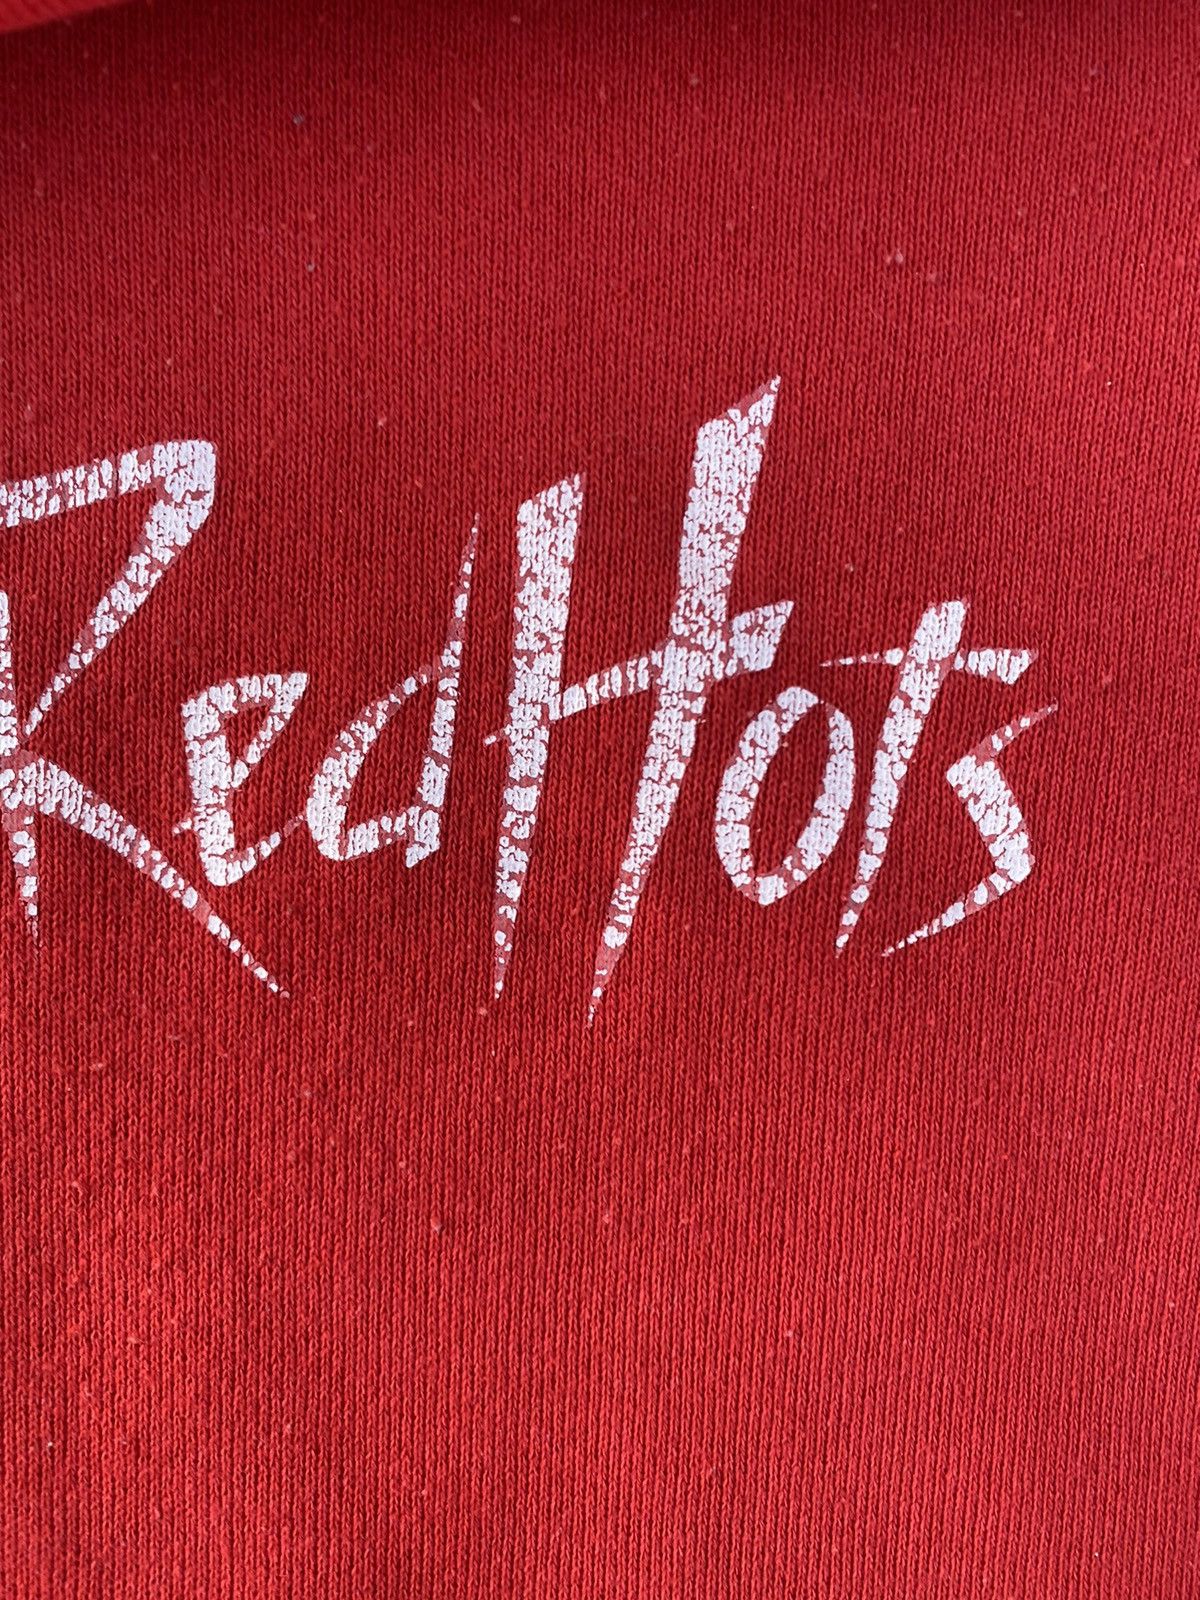 Vintage Vintage 90s Red Hots Russell Hoodie Size US L / EU 52-54 / 3 - 5 Thumbnail